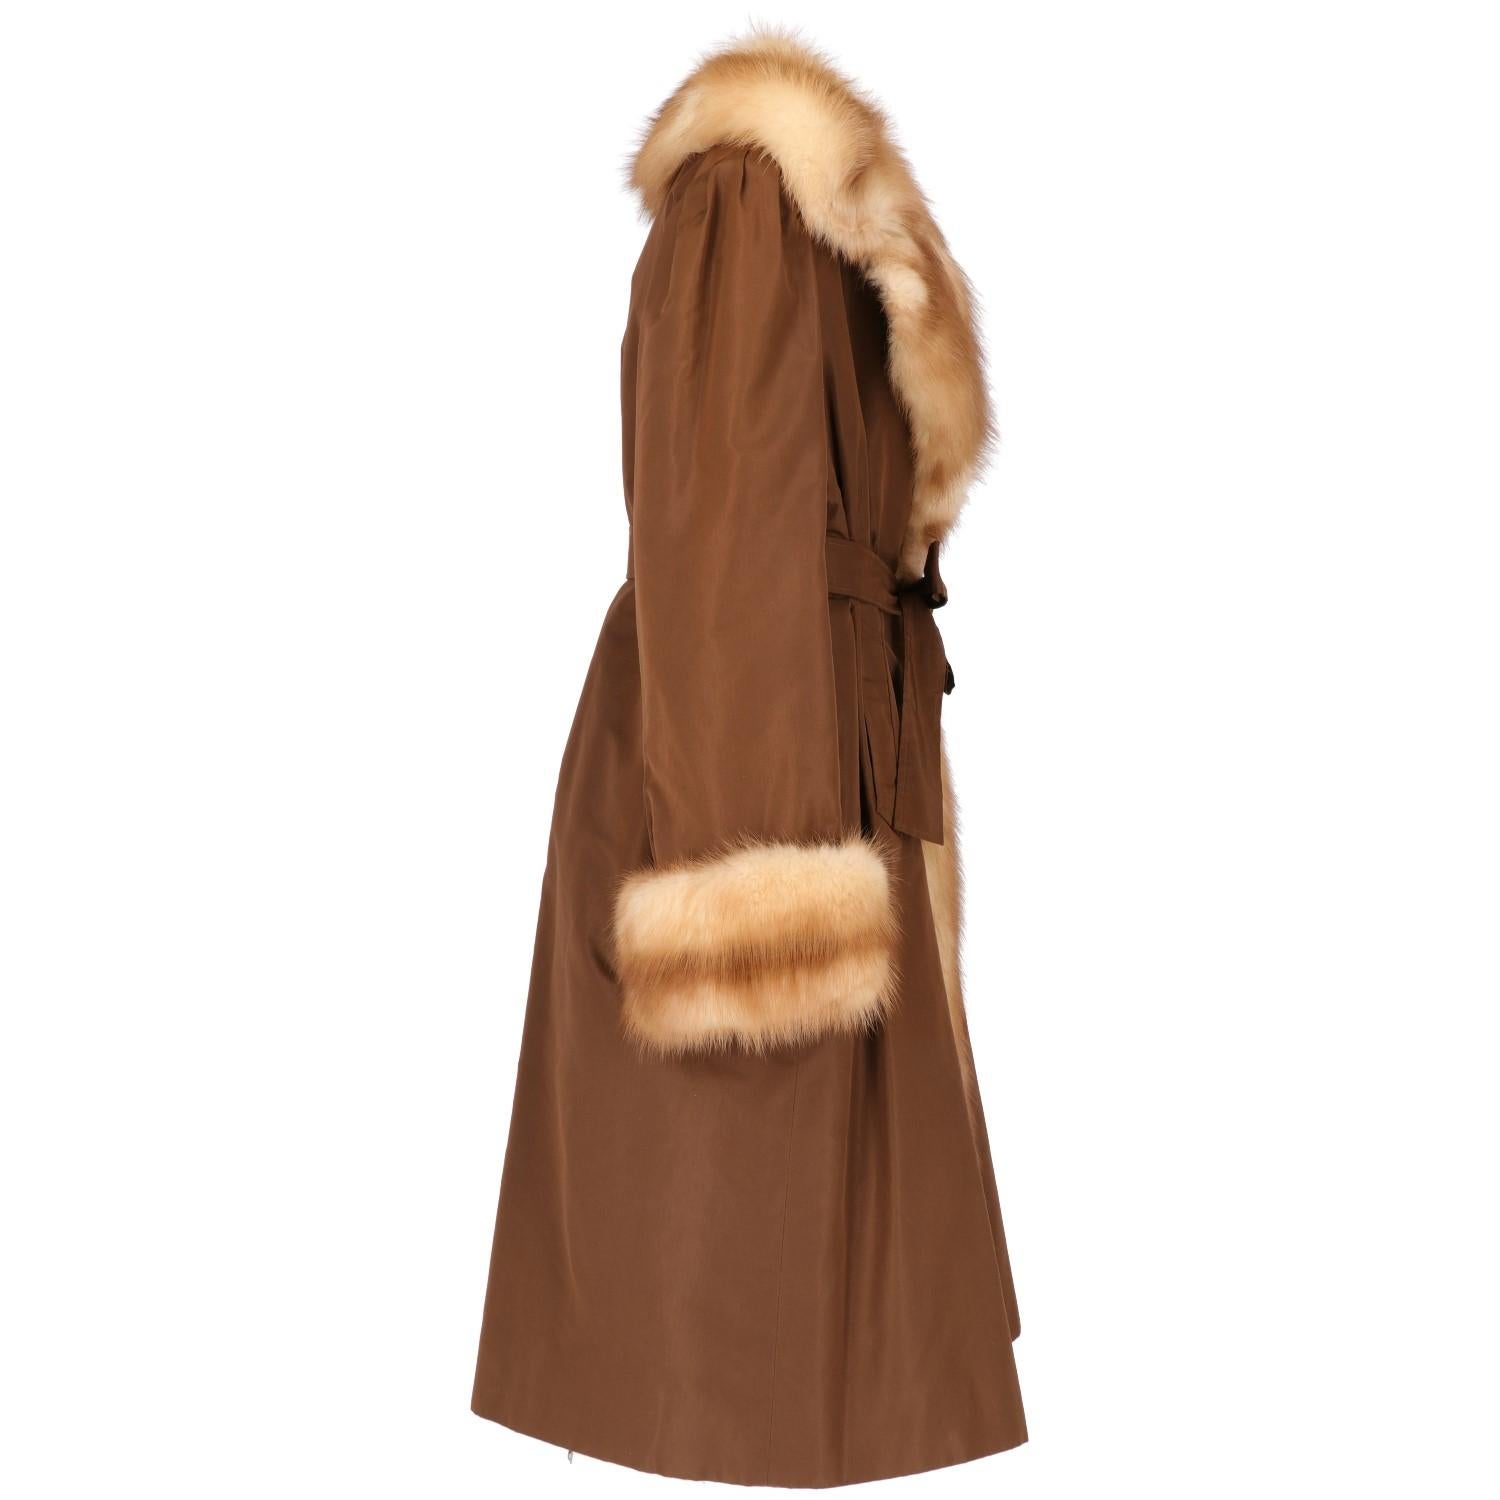 The regal brown coat with beech marten fur  at lining, edges, cuffs and collar, features  two welt front pockets, one inner pocket and one belt at waist. 
Please note this item cannot be shipped outside the European Union. 
 Years: 70s

Size: 44